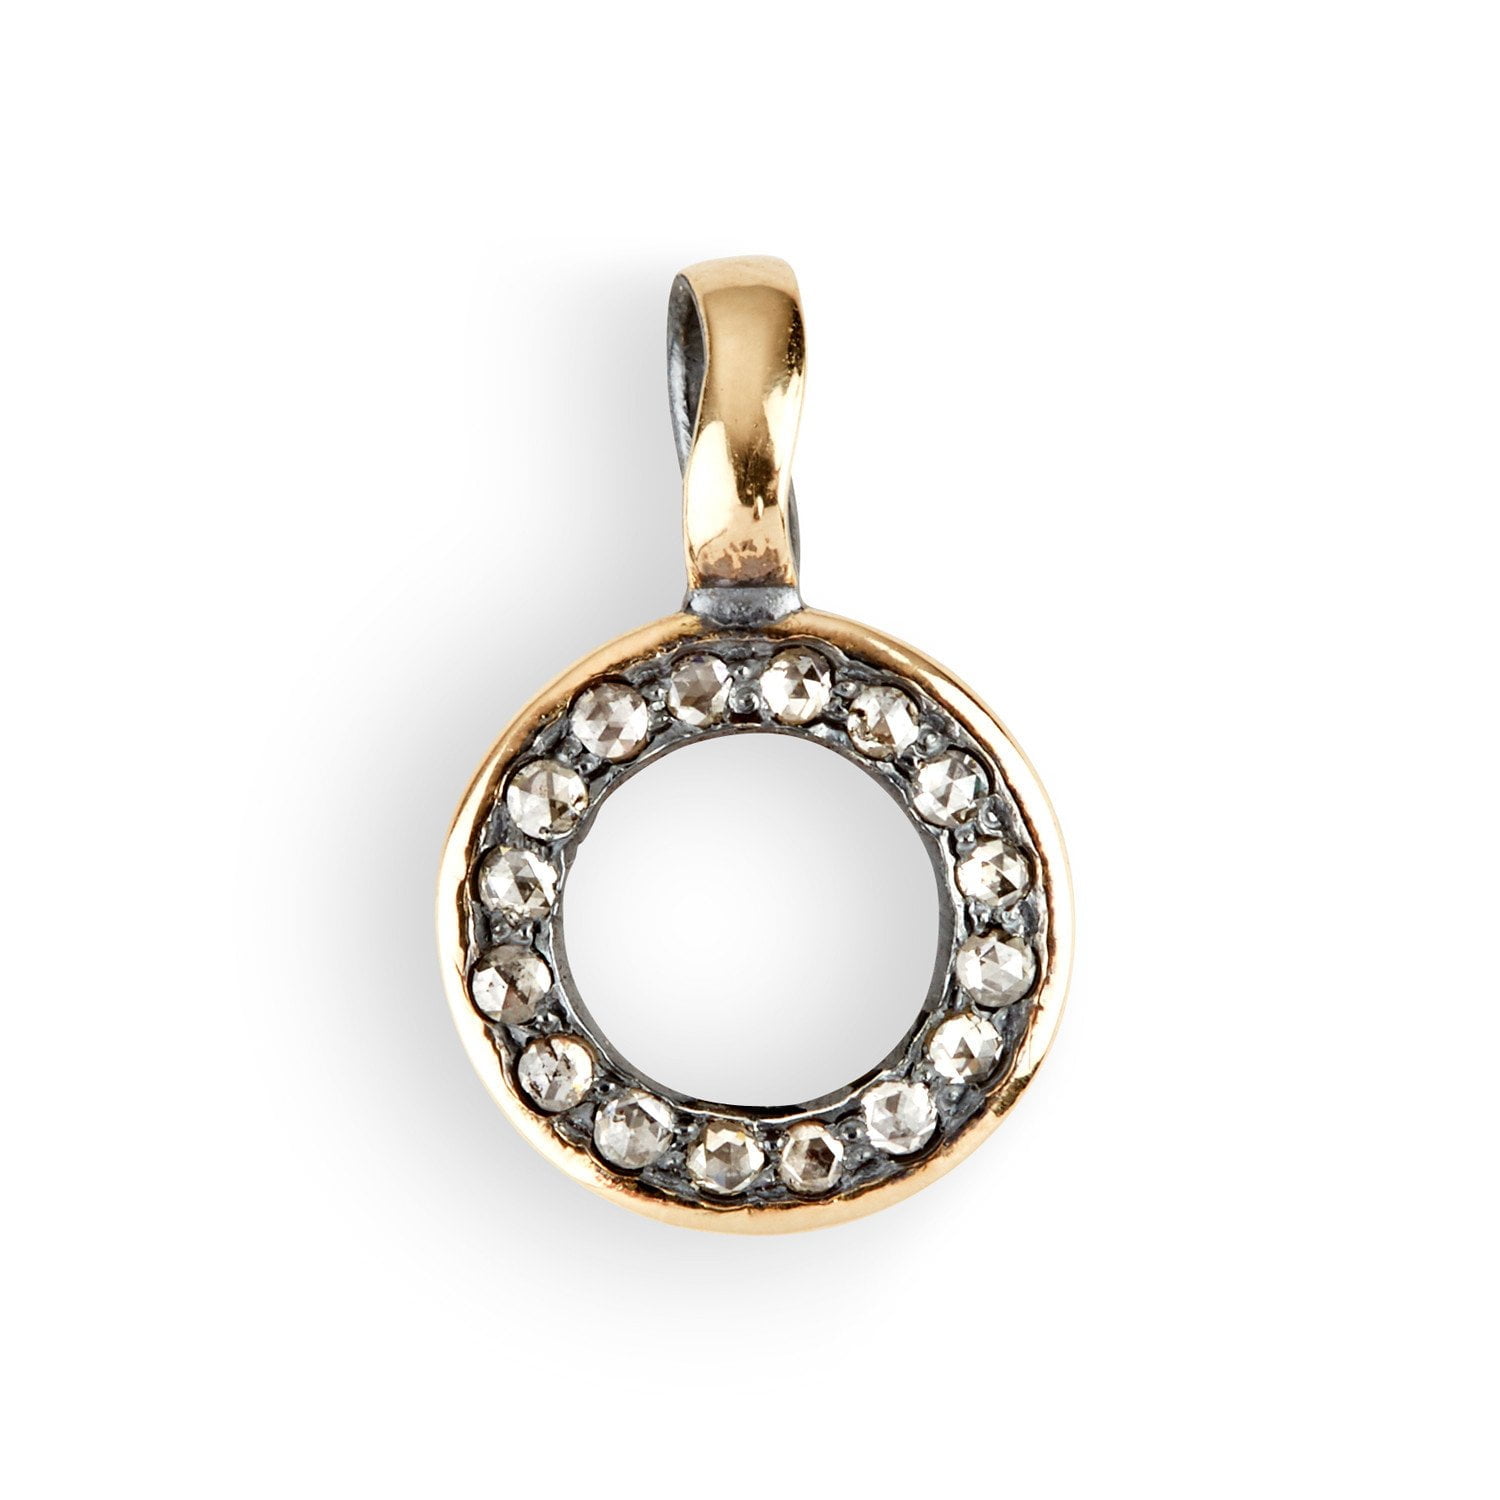 Essex Oval Open Pendant Made Of Silver And 14 Karat Gold With Rose Cut Diamonds